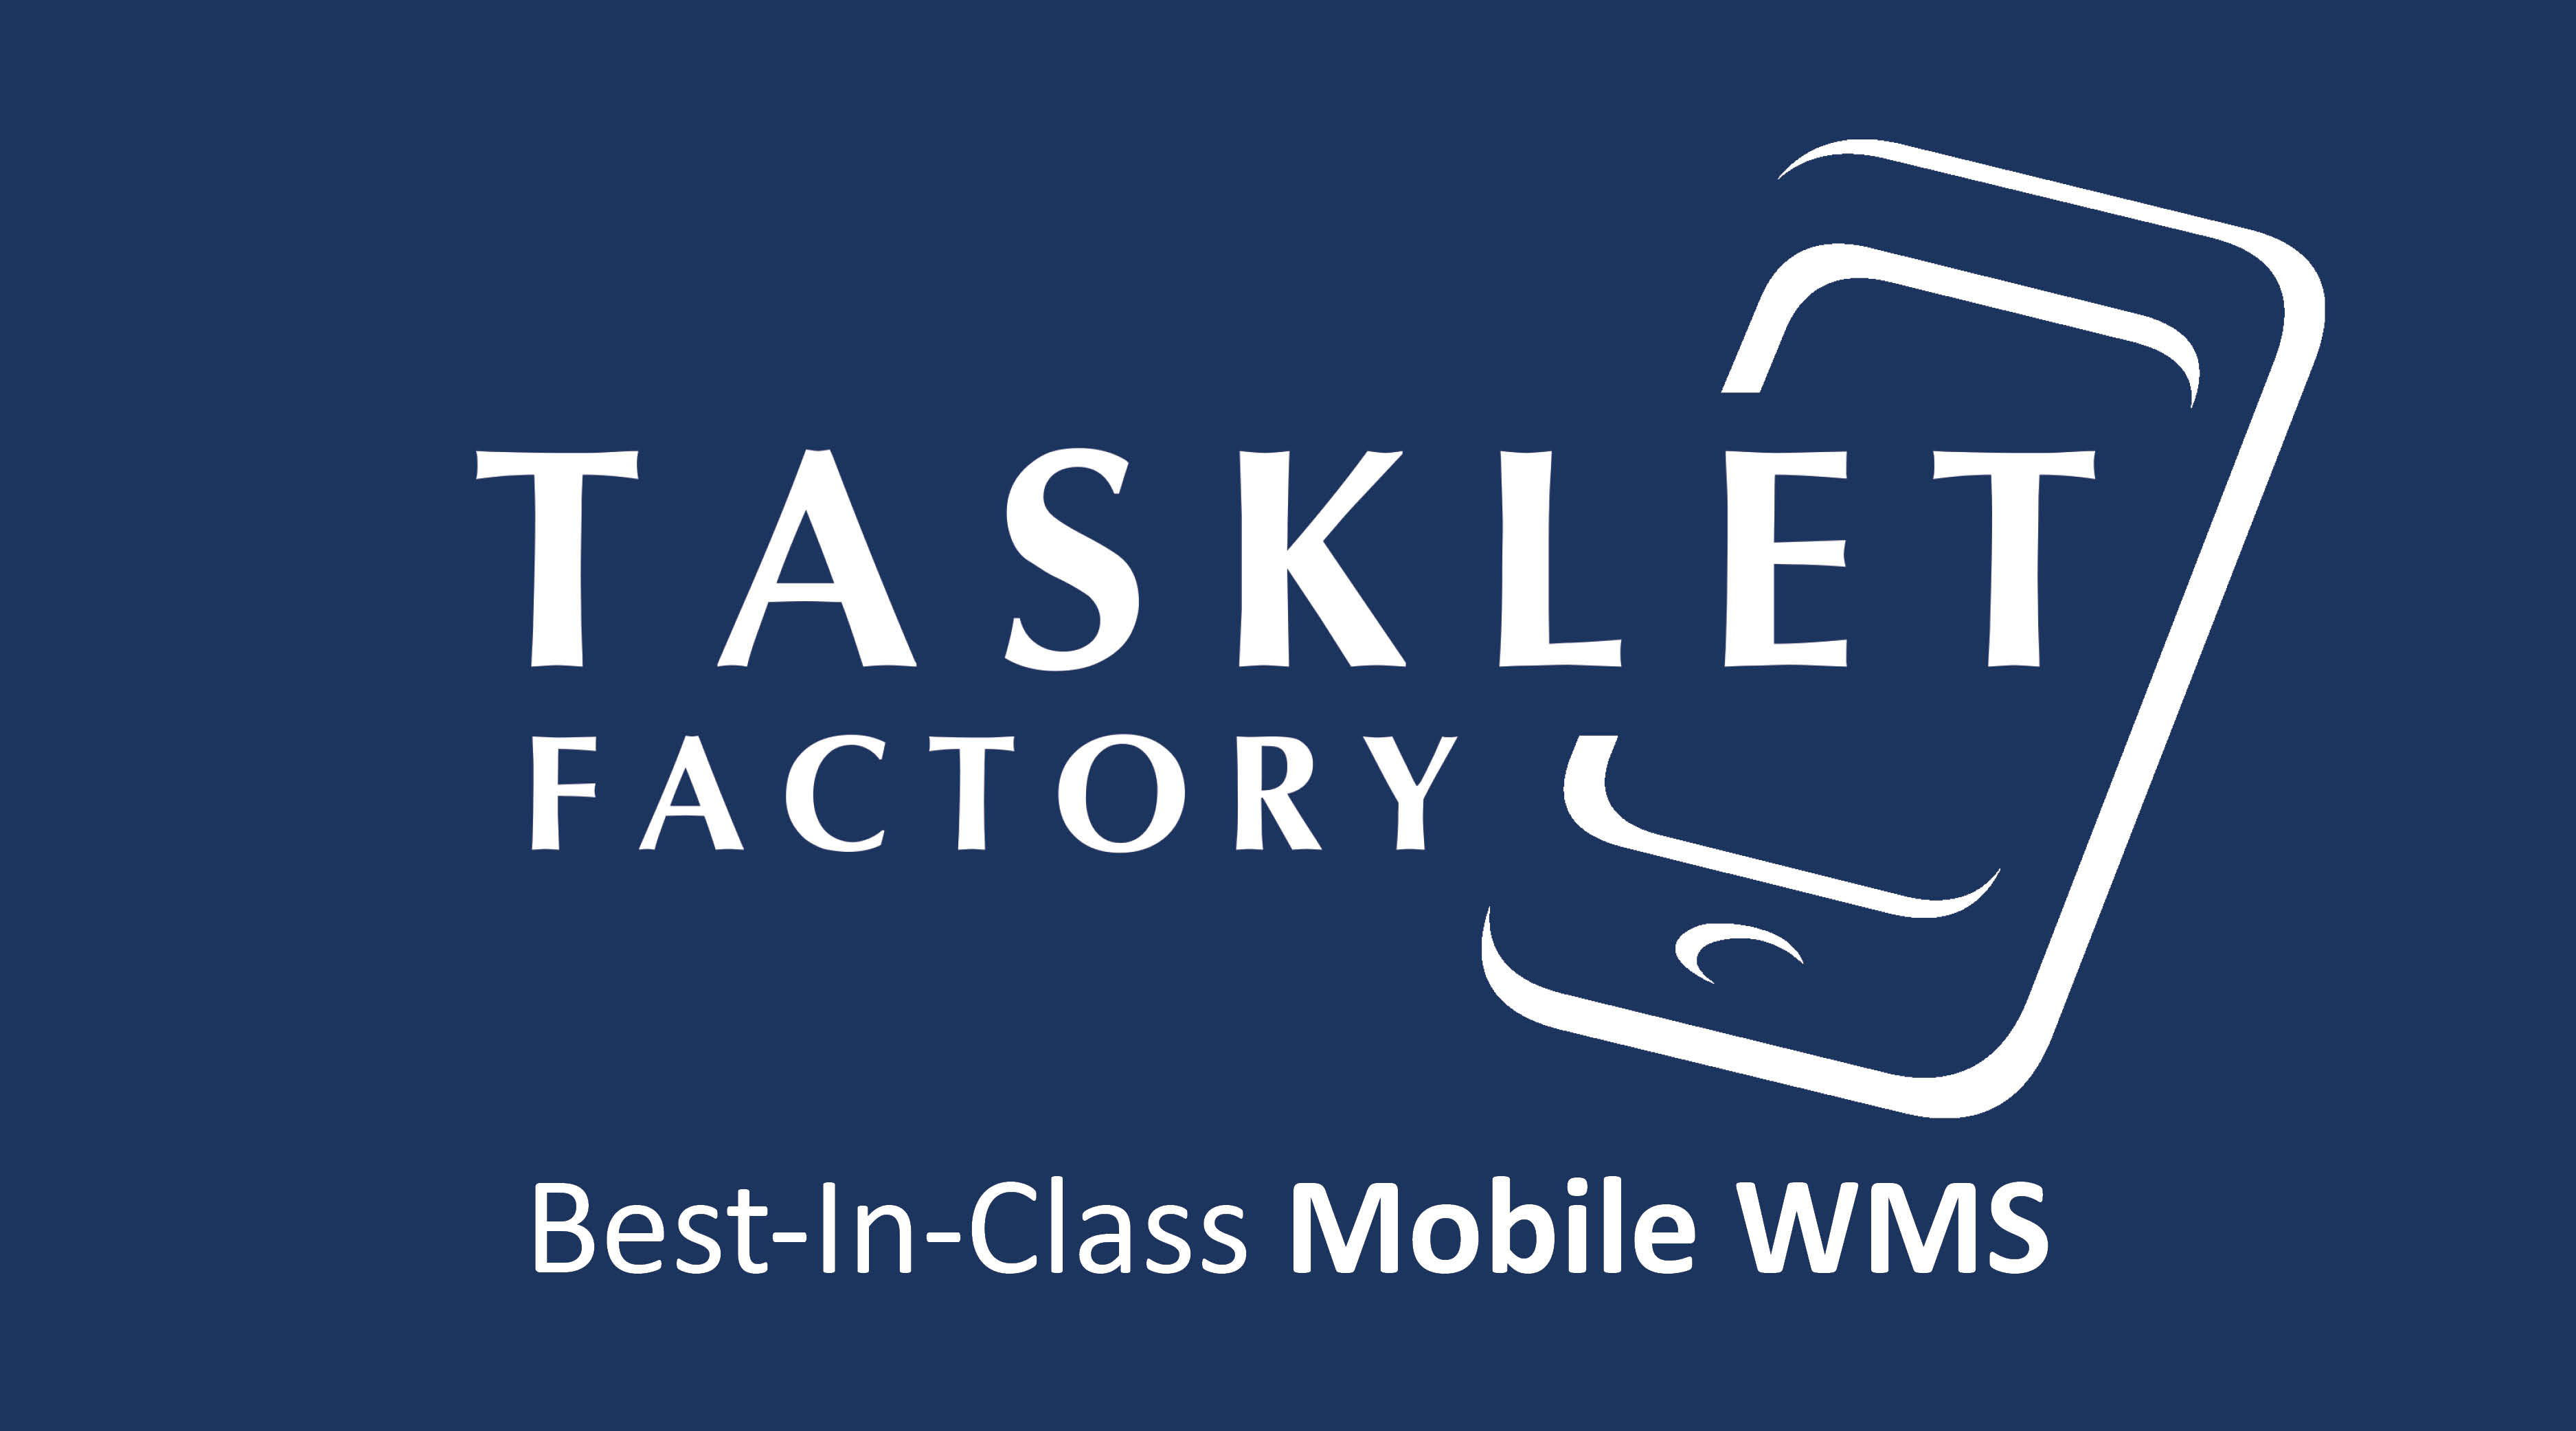 Contact Tasklet Factory